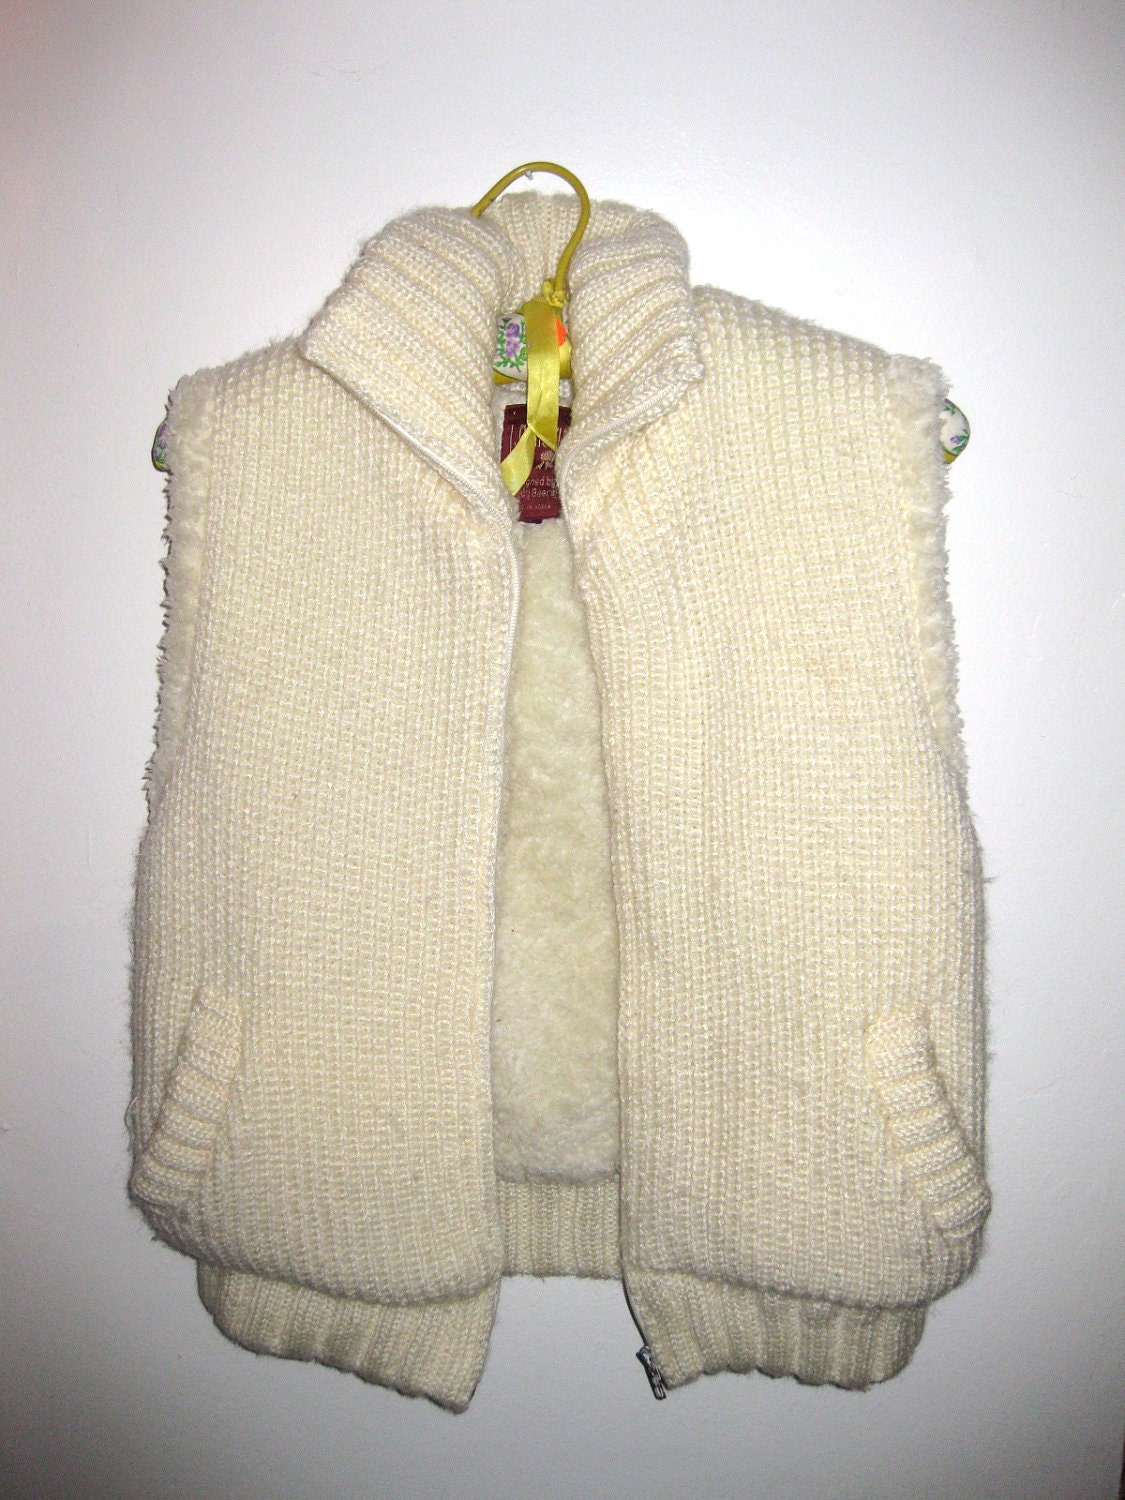 J. Gallery Cream Sleeveless Sweater vest Designed by Trudy Beers